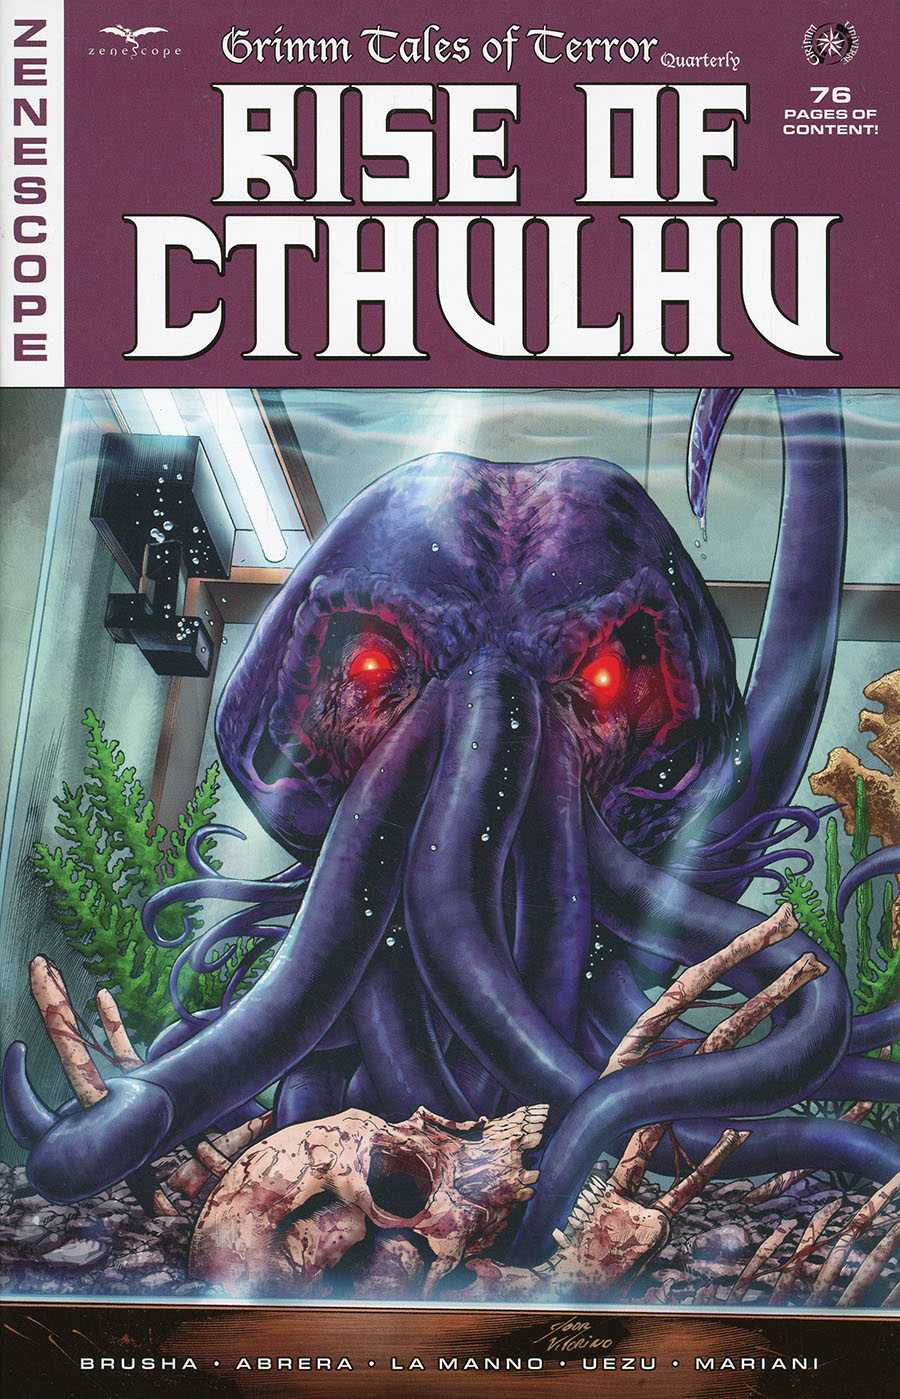 Grimm Fairy Tales Presents Grimm Tales Of Terror Quarterly #7 Rise Of Cthulhu Cover B Igor Vitorino